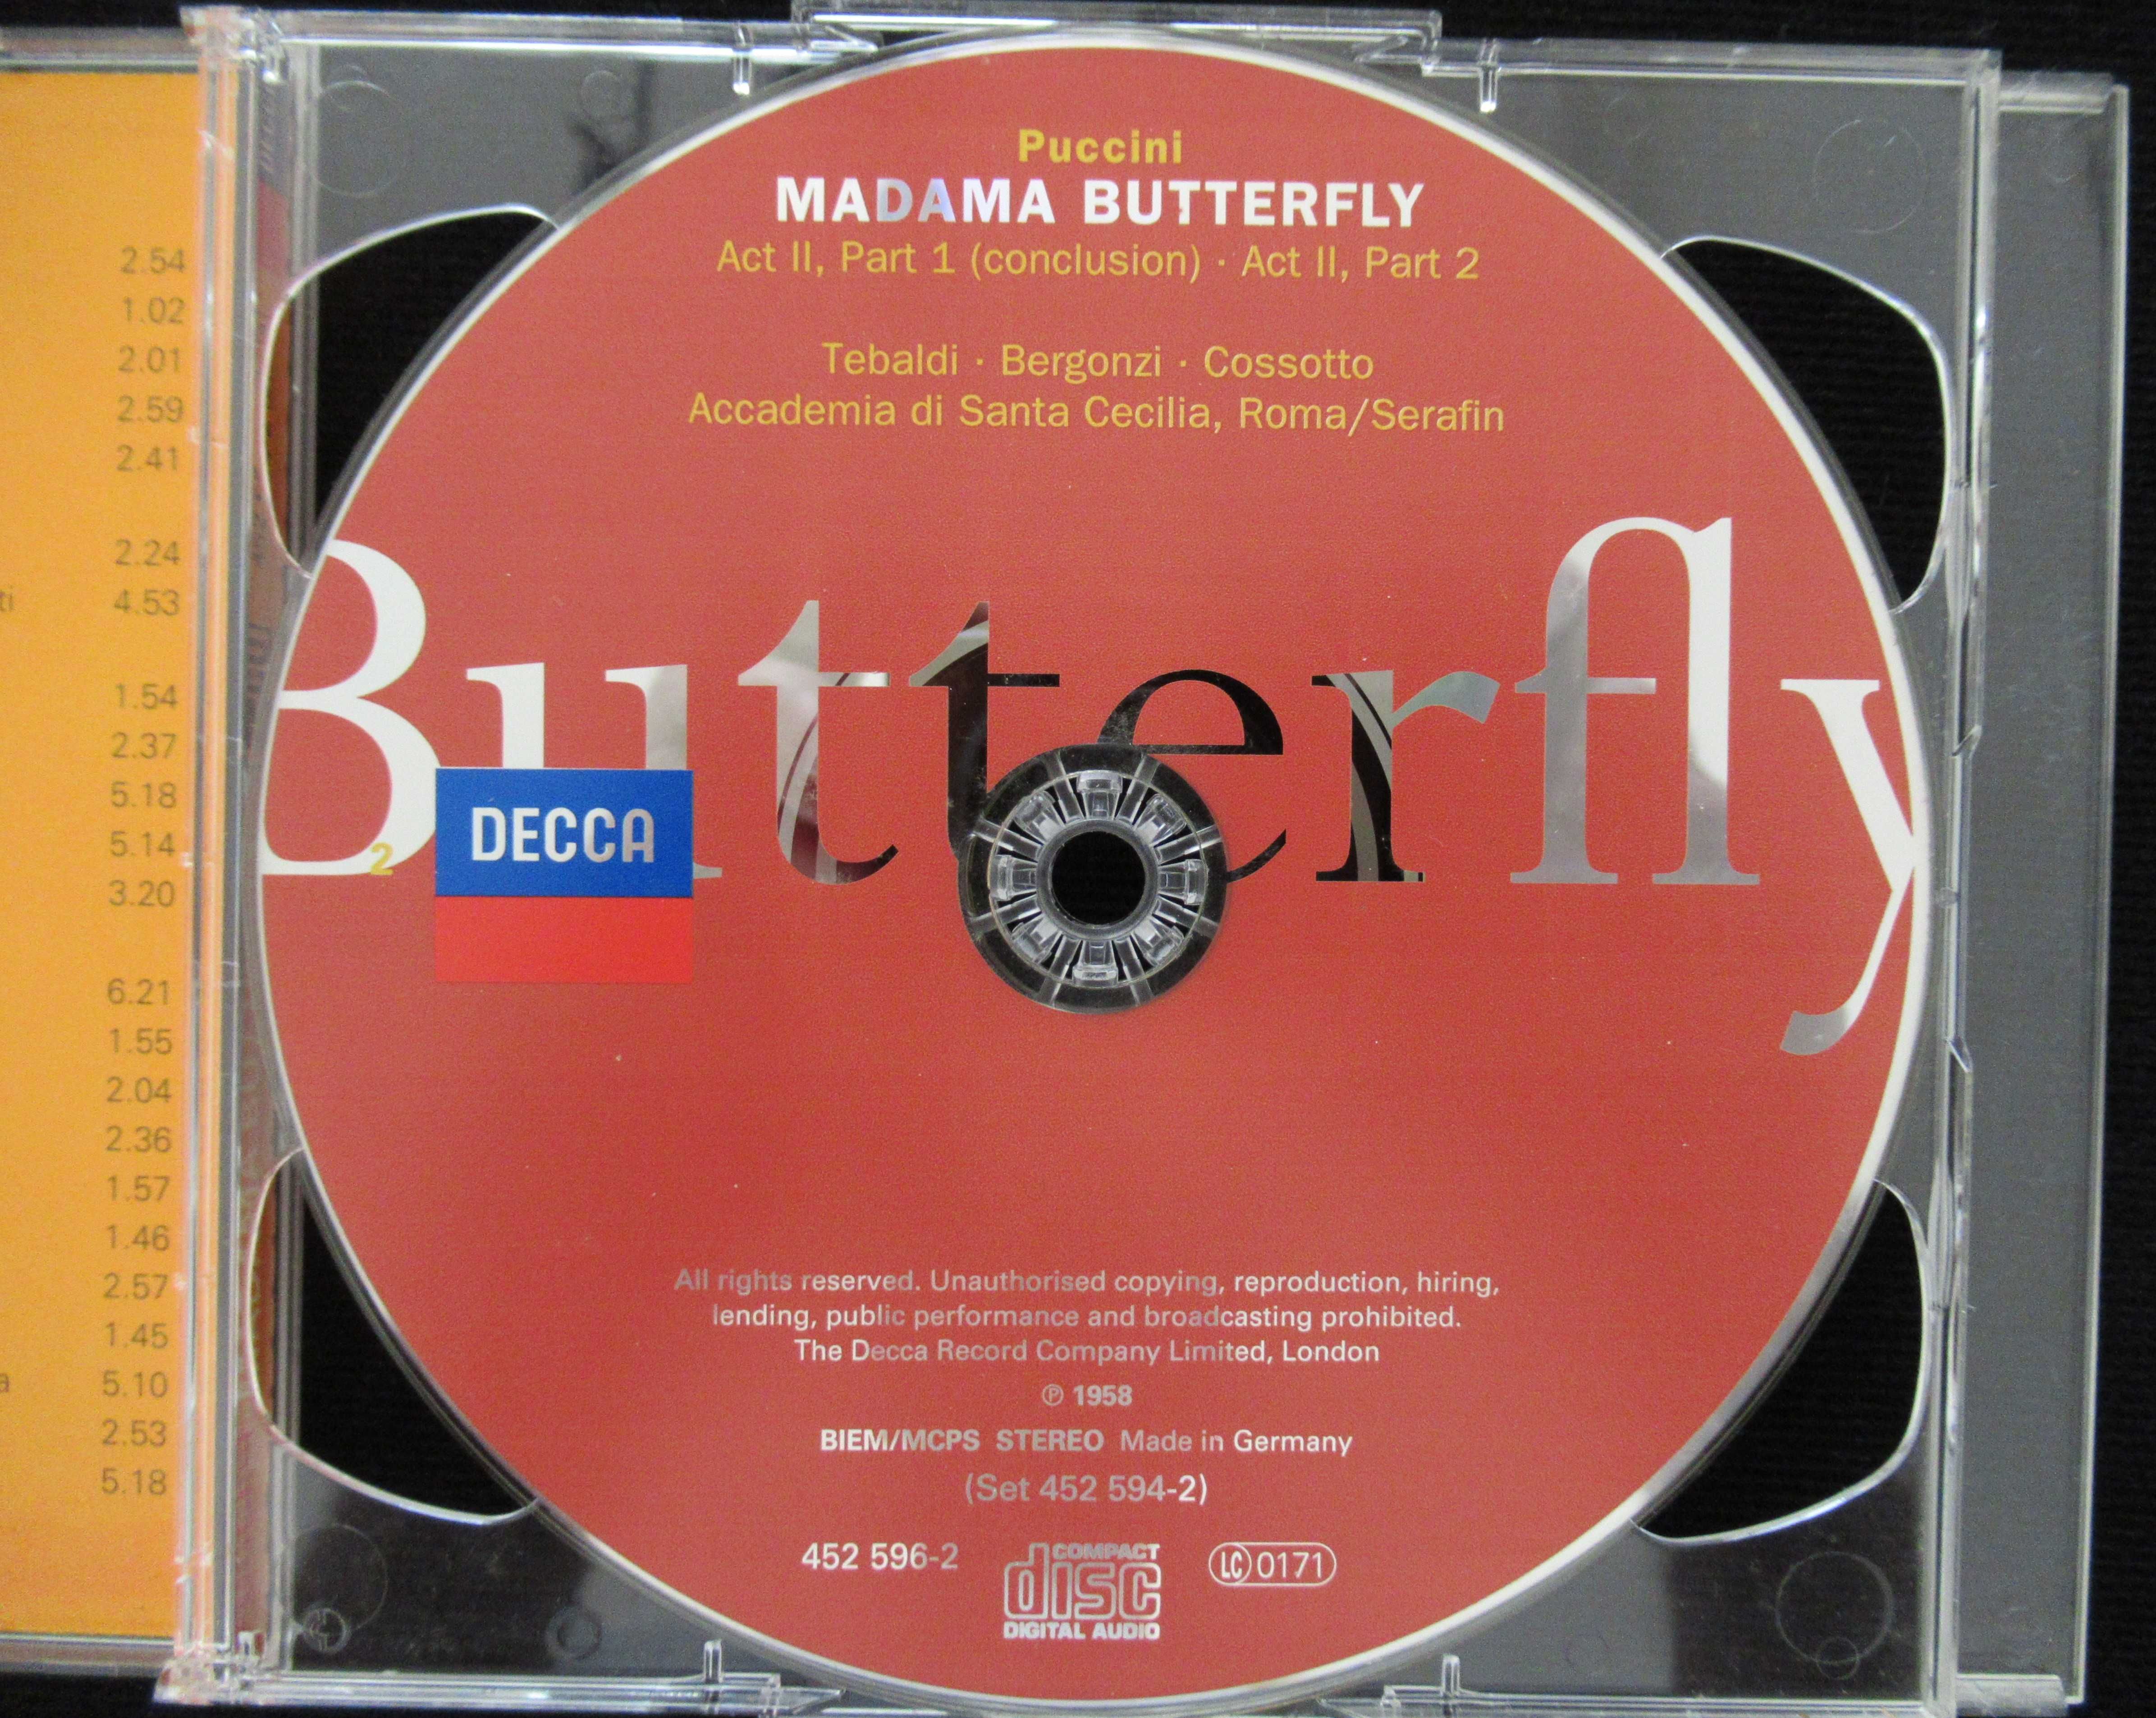 Puccini - Madama Butterfly - CD2 (Ref. 5)